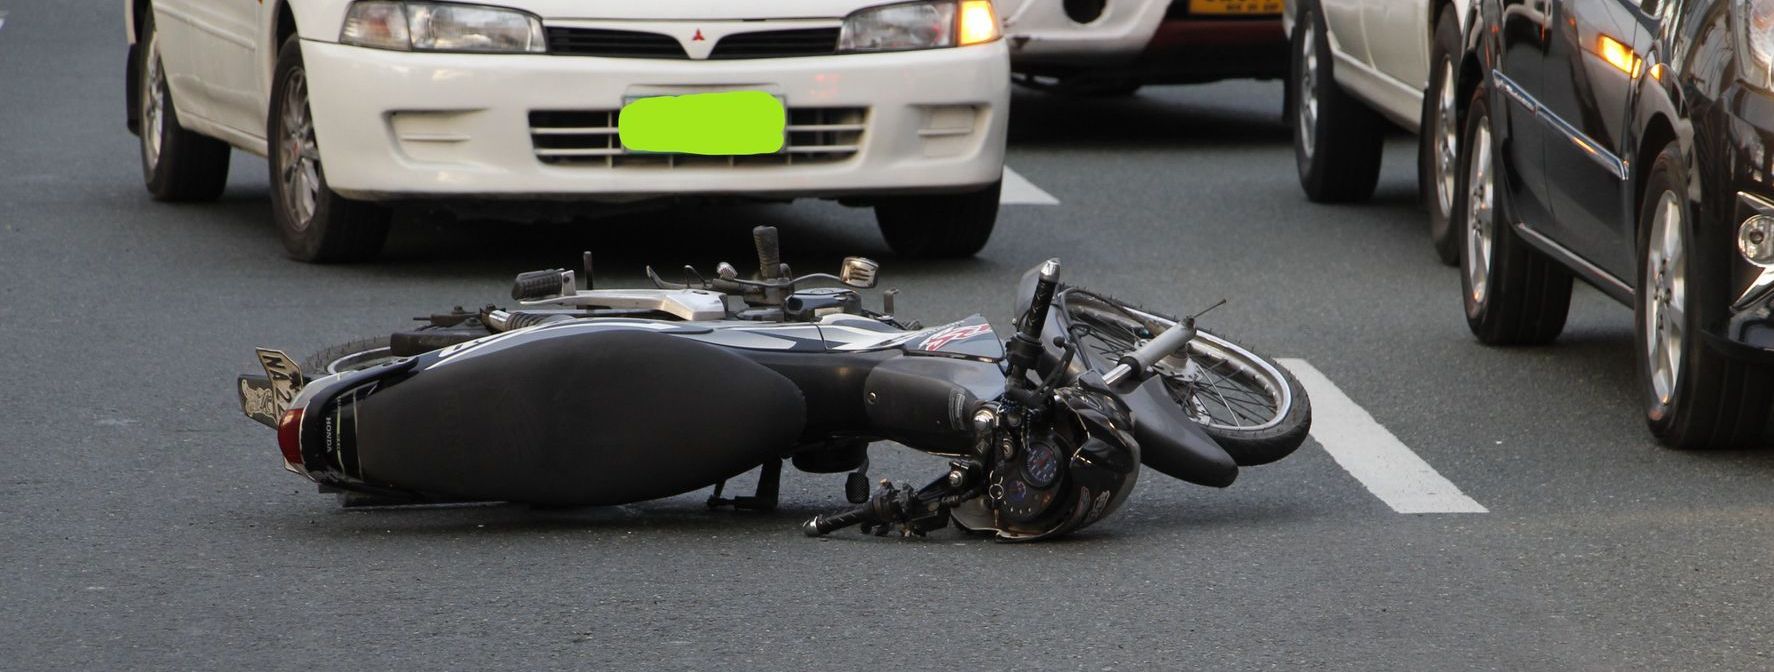 A motorcycle accident with substantial accident benefits